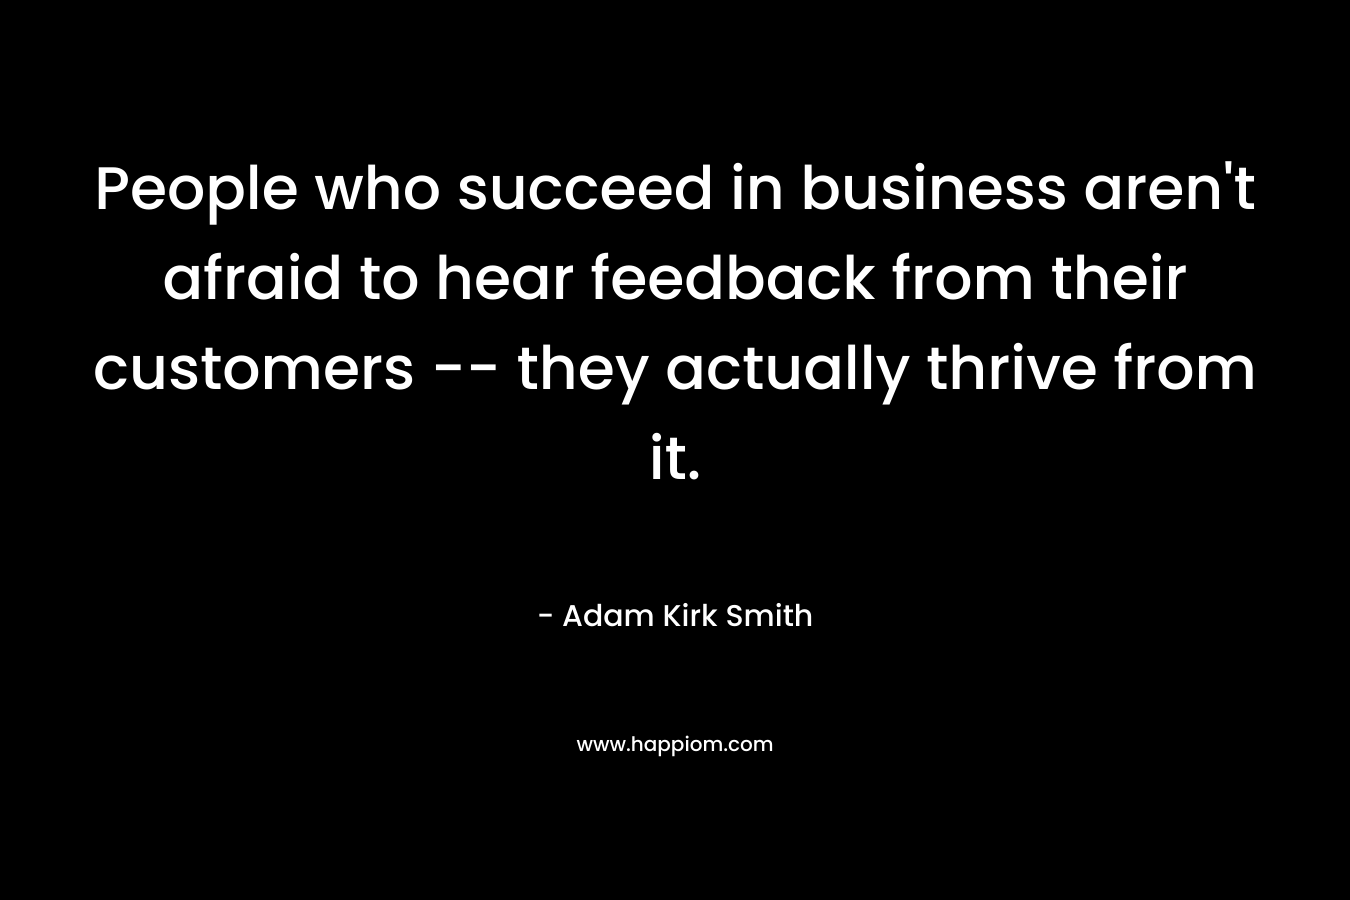 People who succeed in business aren’t afraid to hear feedback from their customers — they actually thrive from it. – Adam Kirk Smith